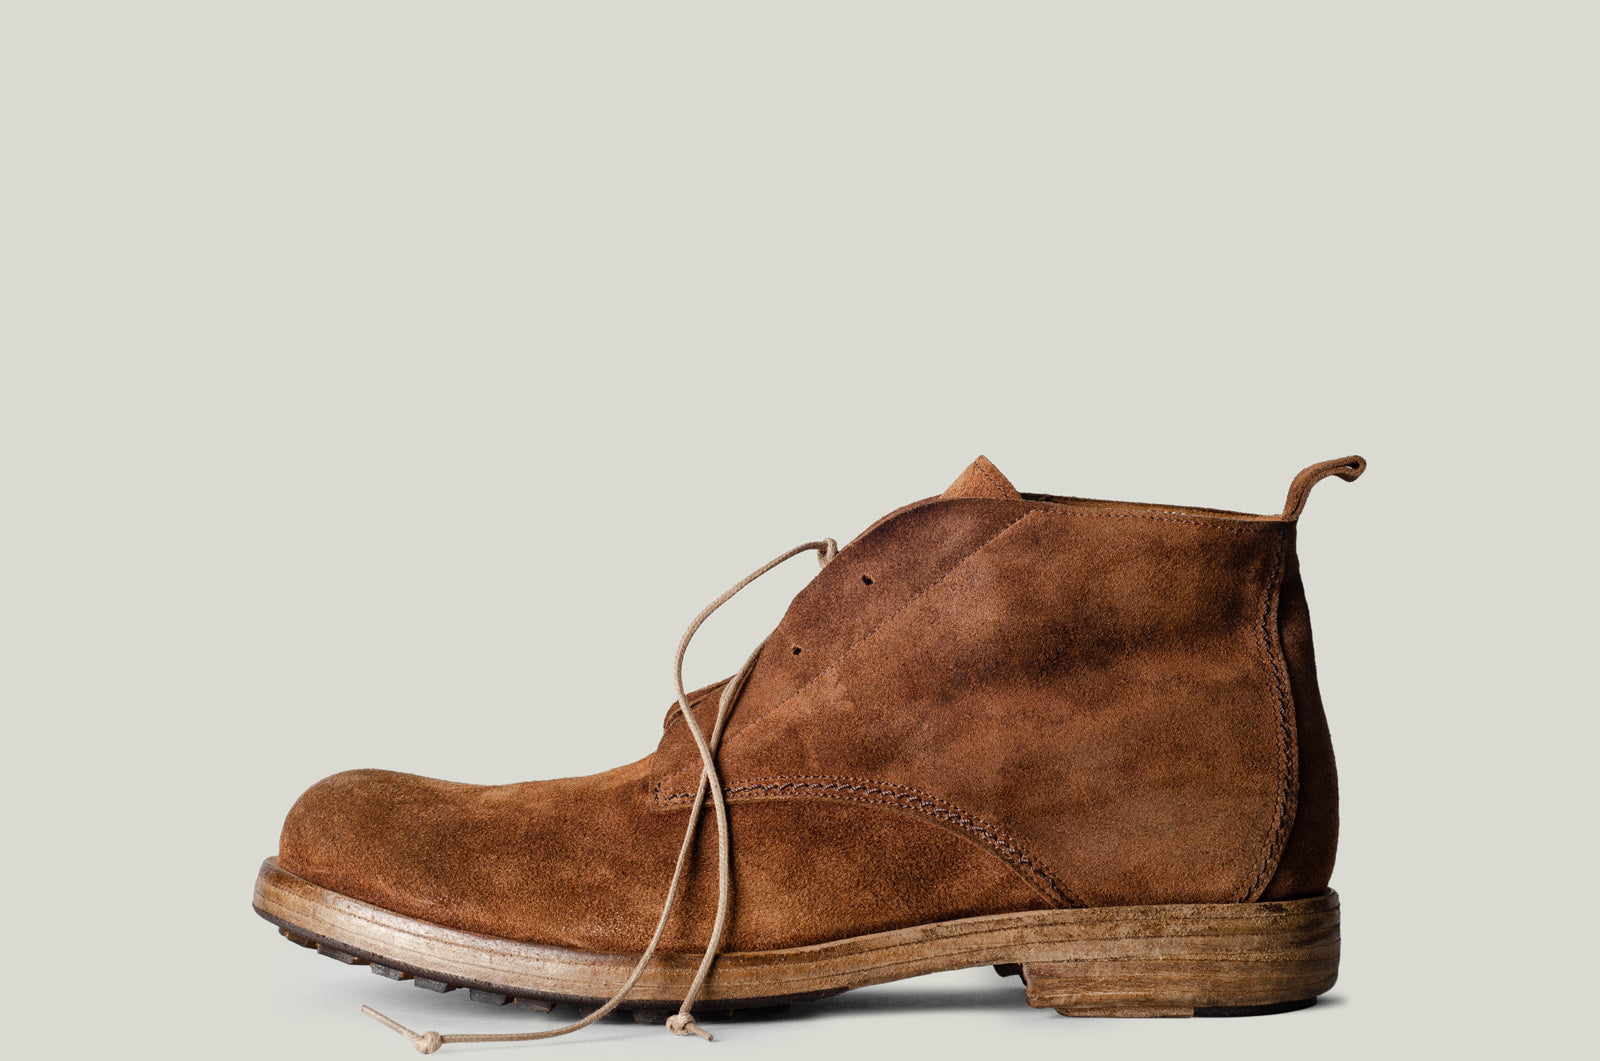 chestnut suede boots